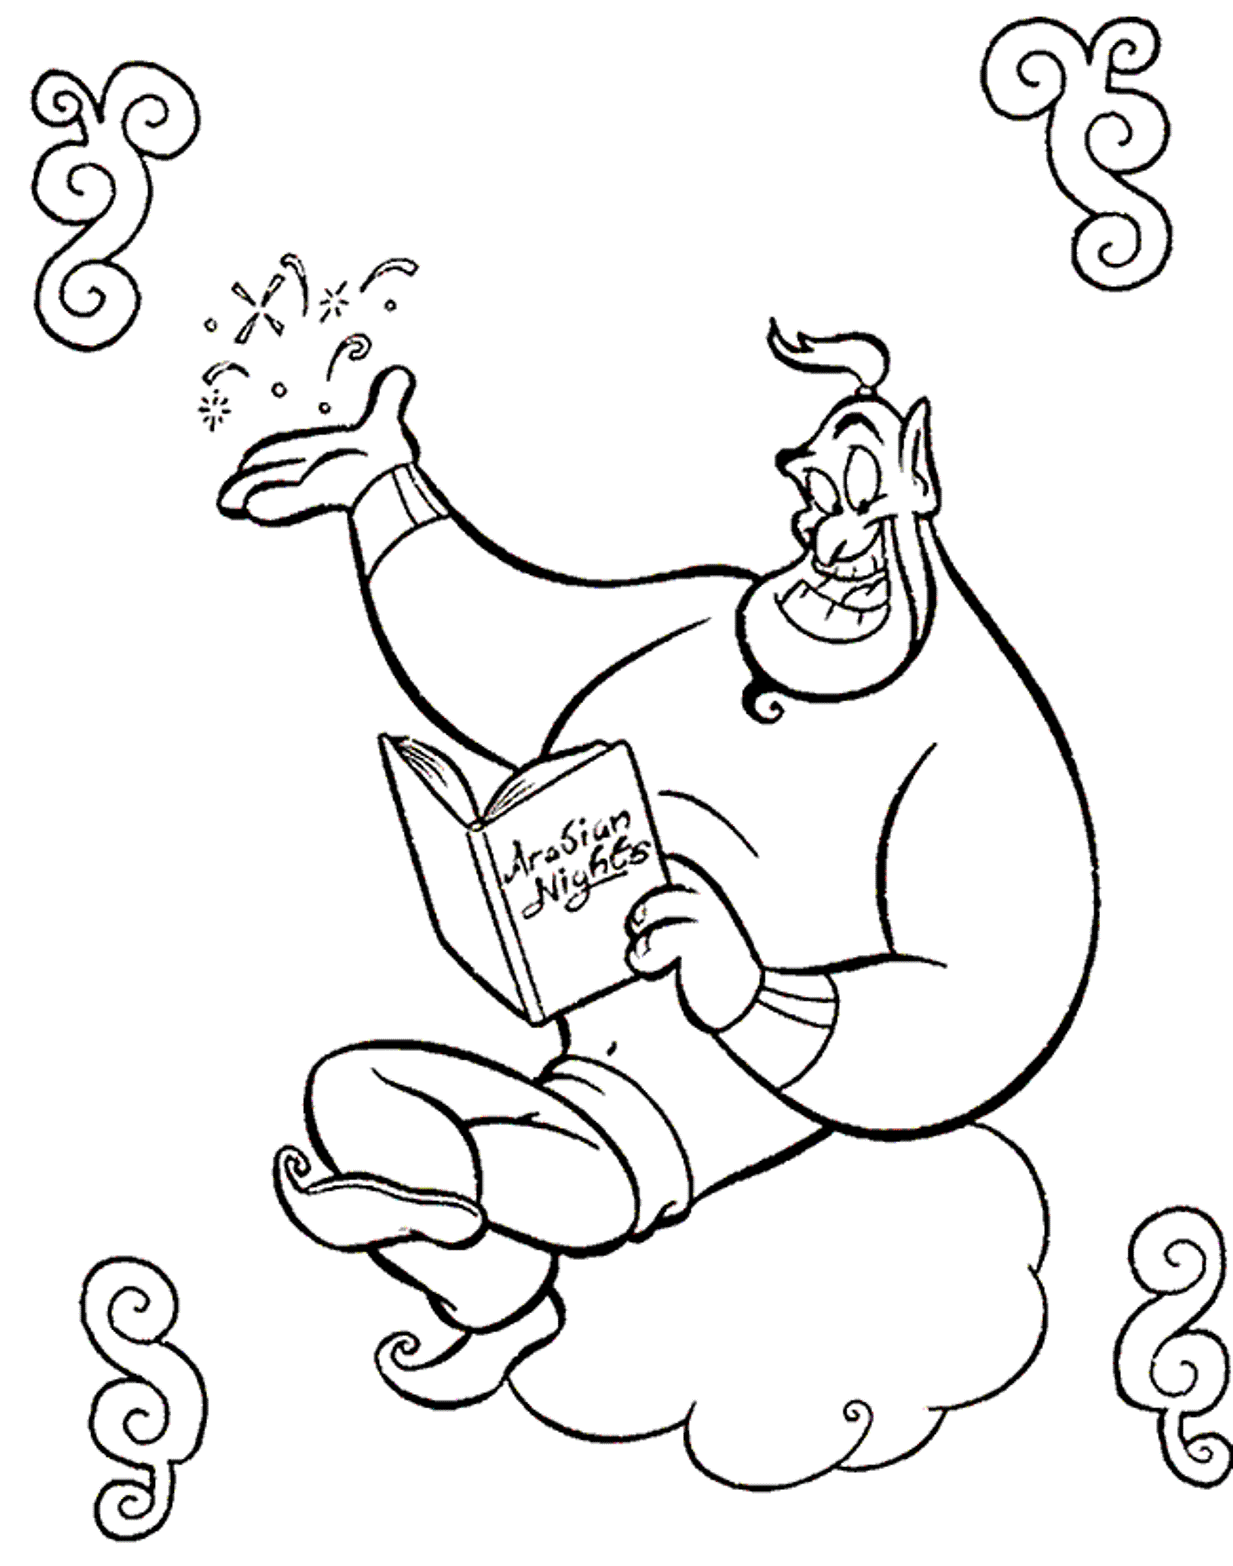 Download Aladdin Coloring Pages Cartoon Genie Or Print Aladdin ...